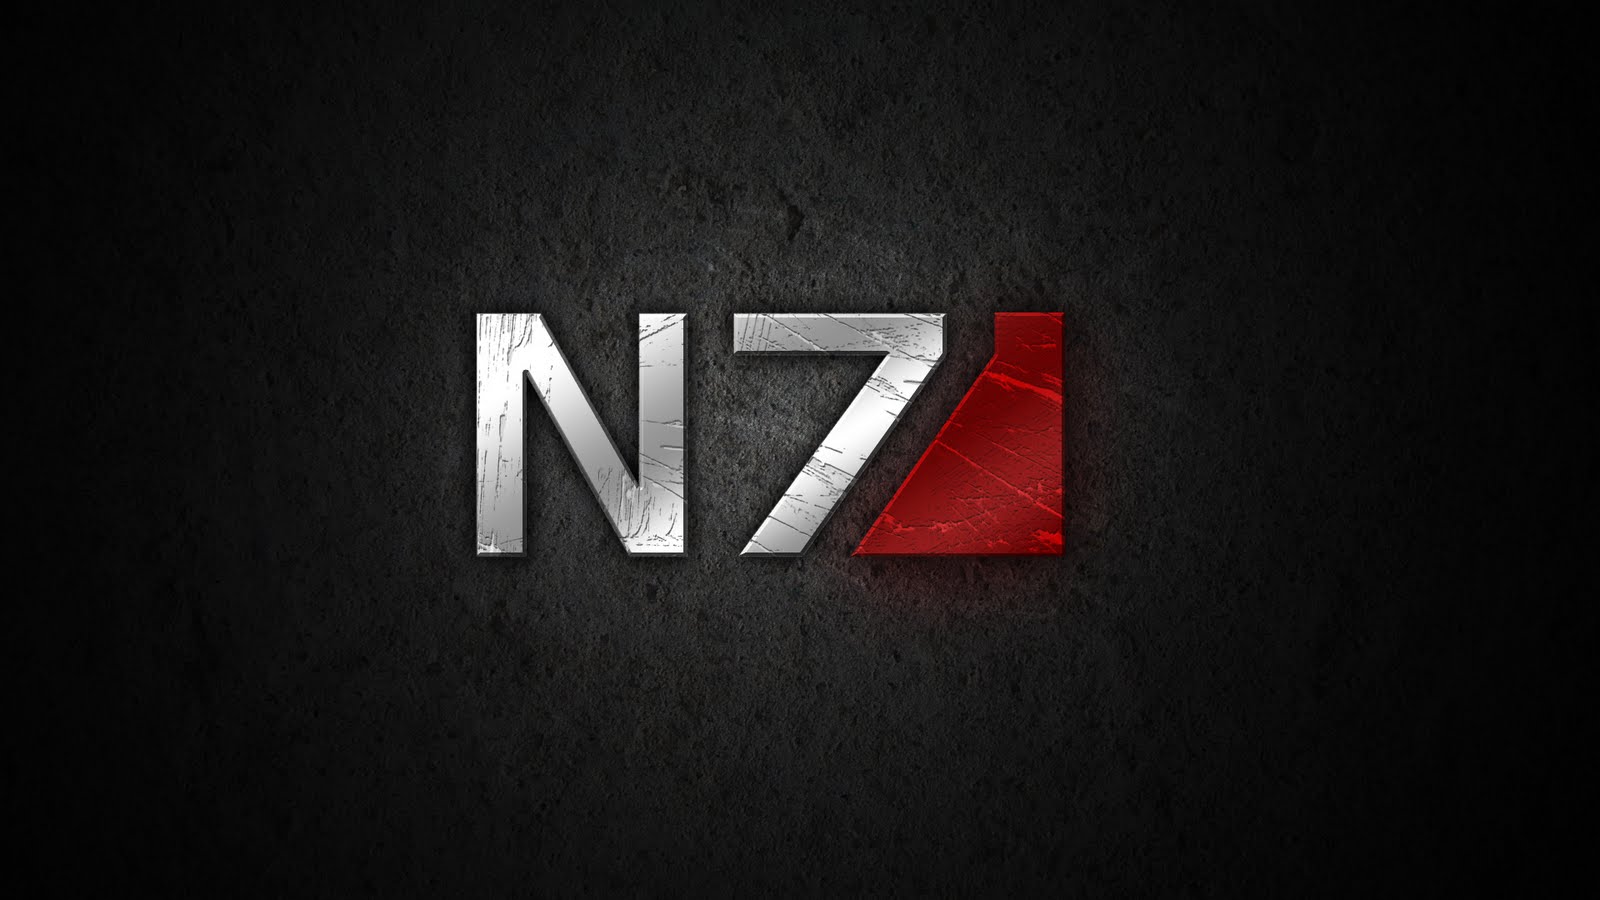 Image Mass Effect N7 Pc Android iPhone And iPad Wallpaper